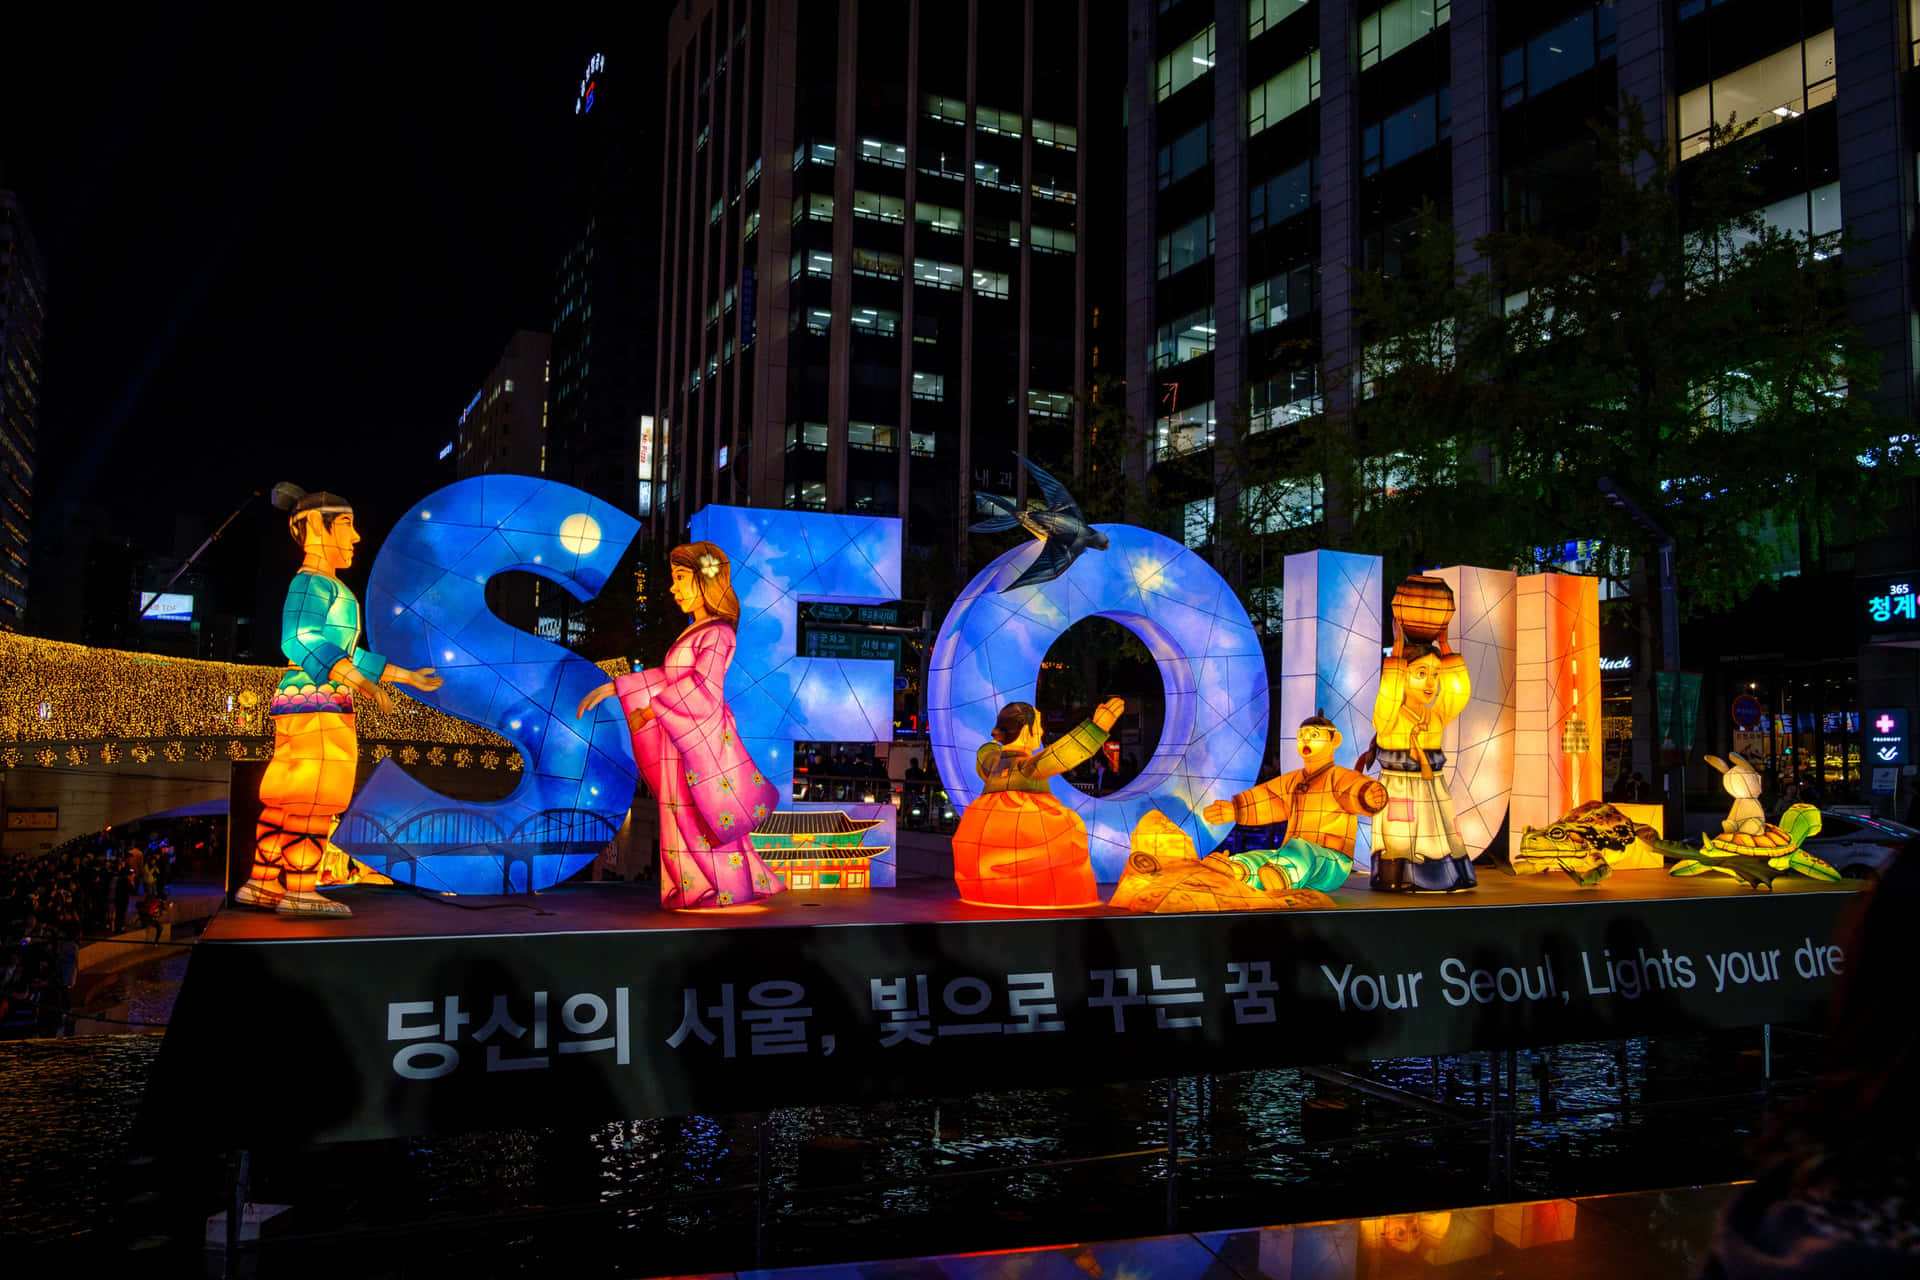 "Discover the charming streets of Seoul, South Korea"